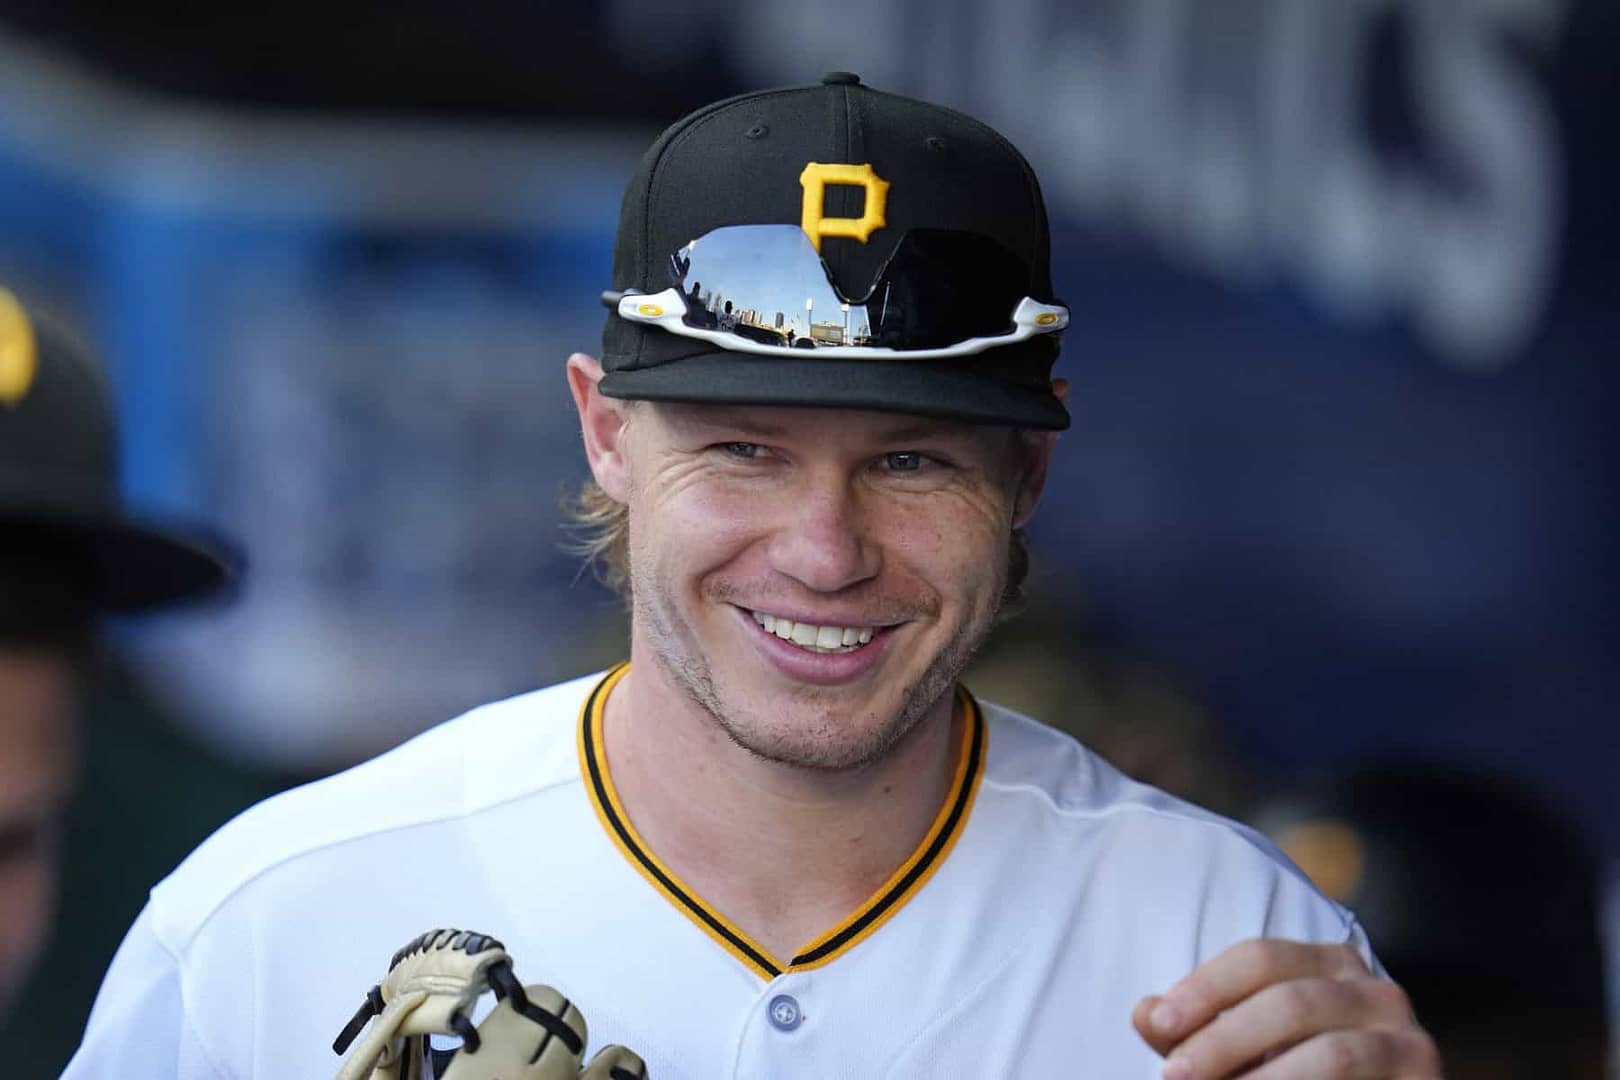 The best Braves-Pirates MLB prediction and picks to know for Monday's game is an MLB home run bet on this Pirate youngster to knock one out...